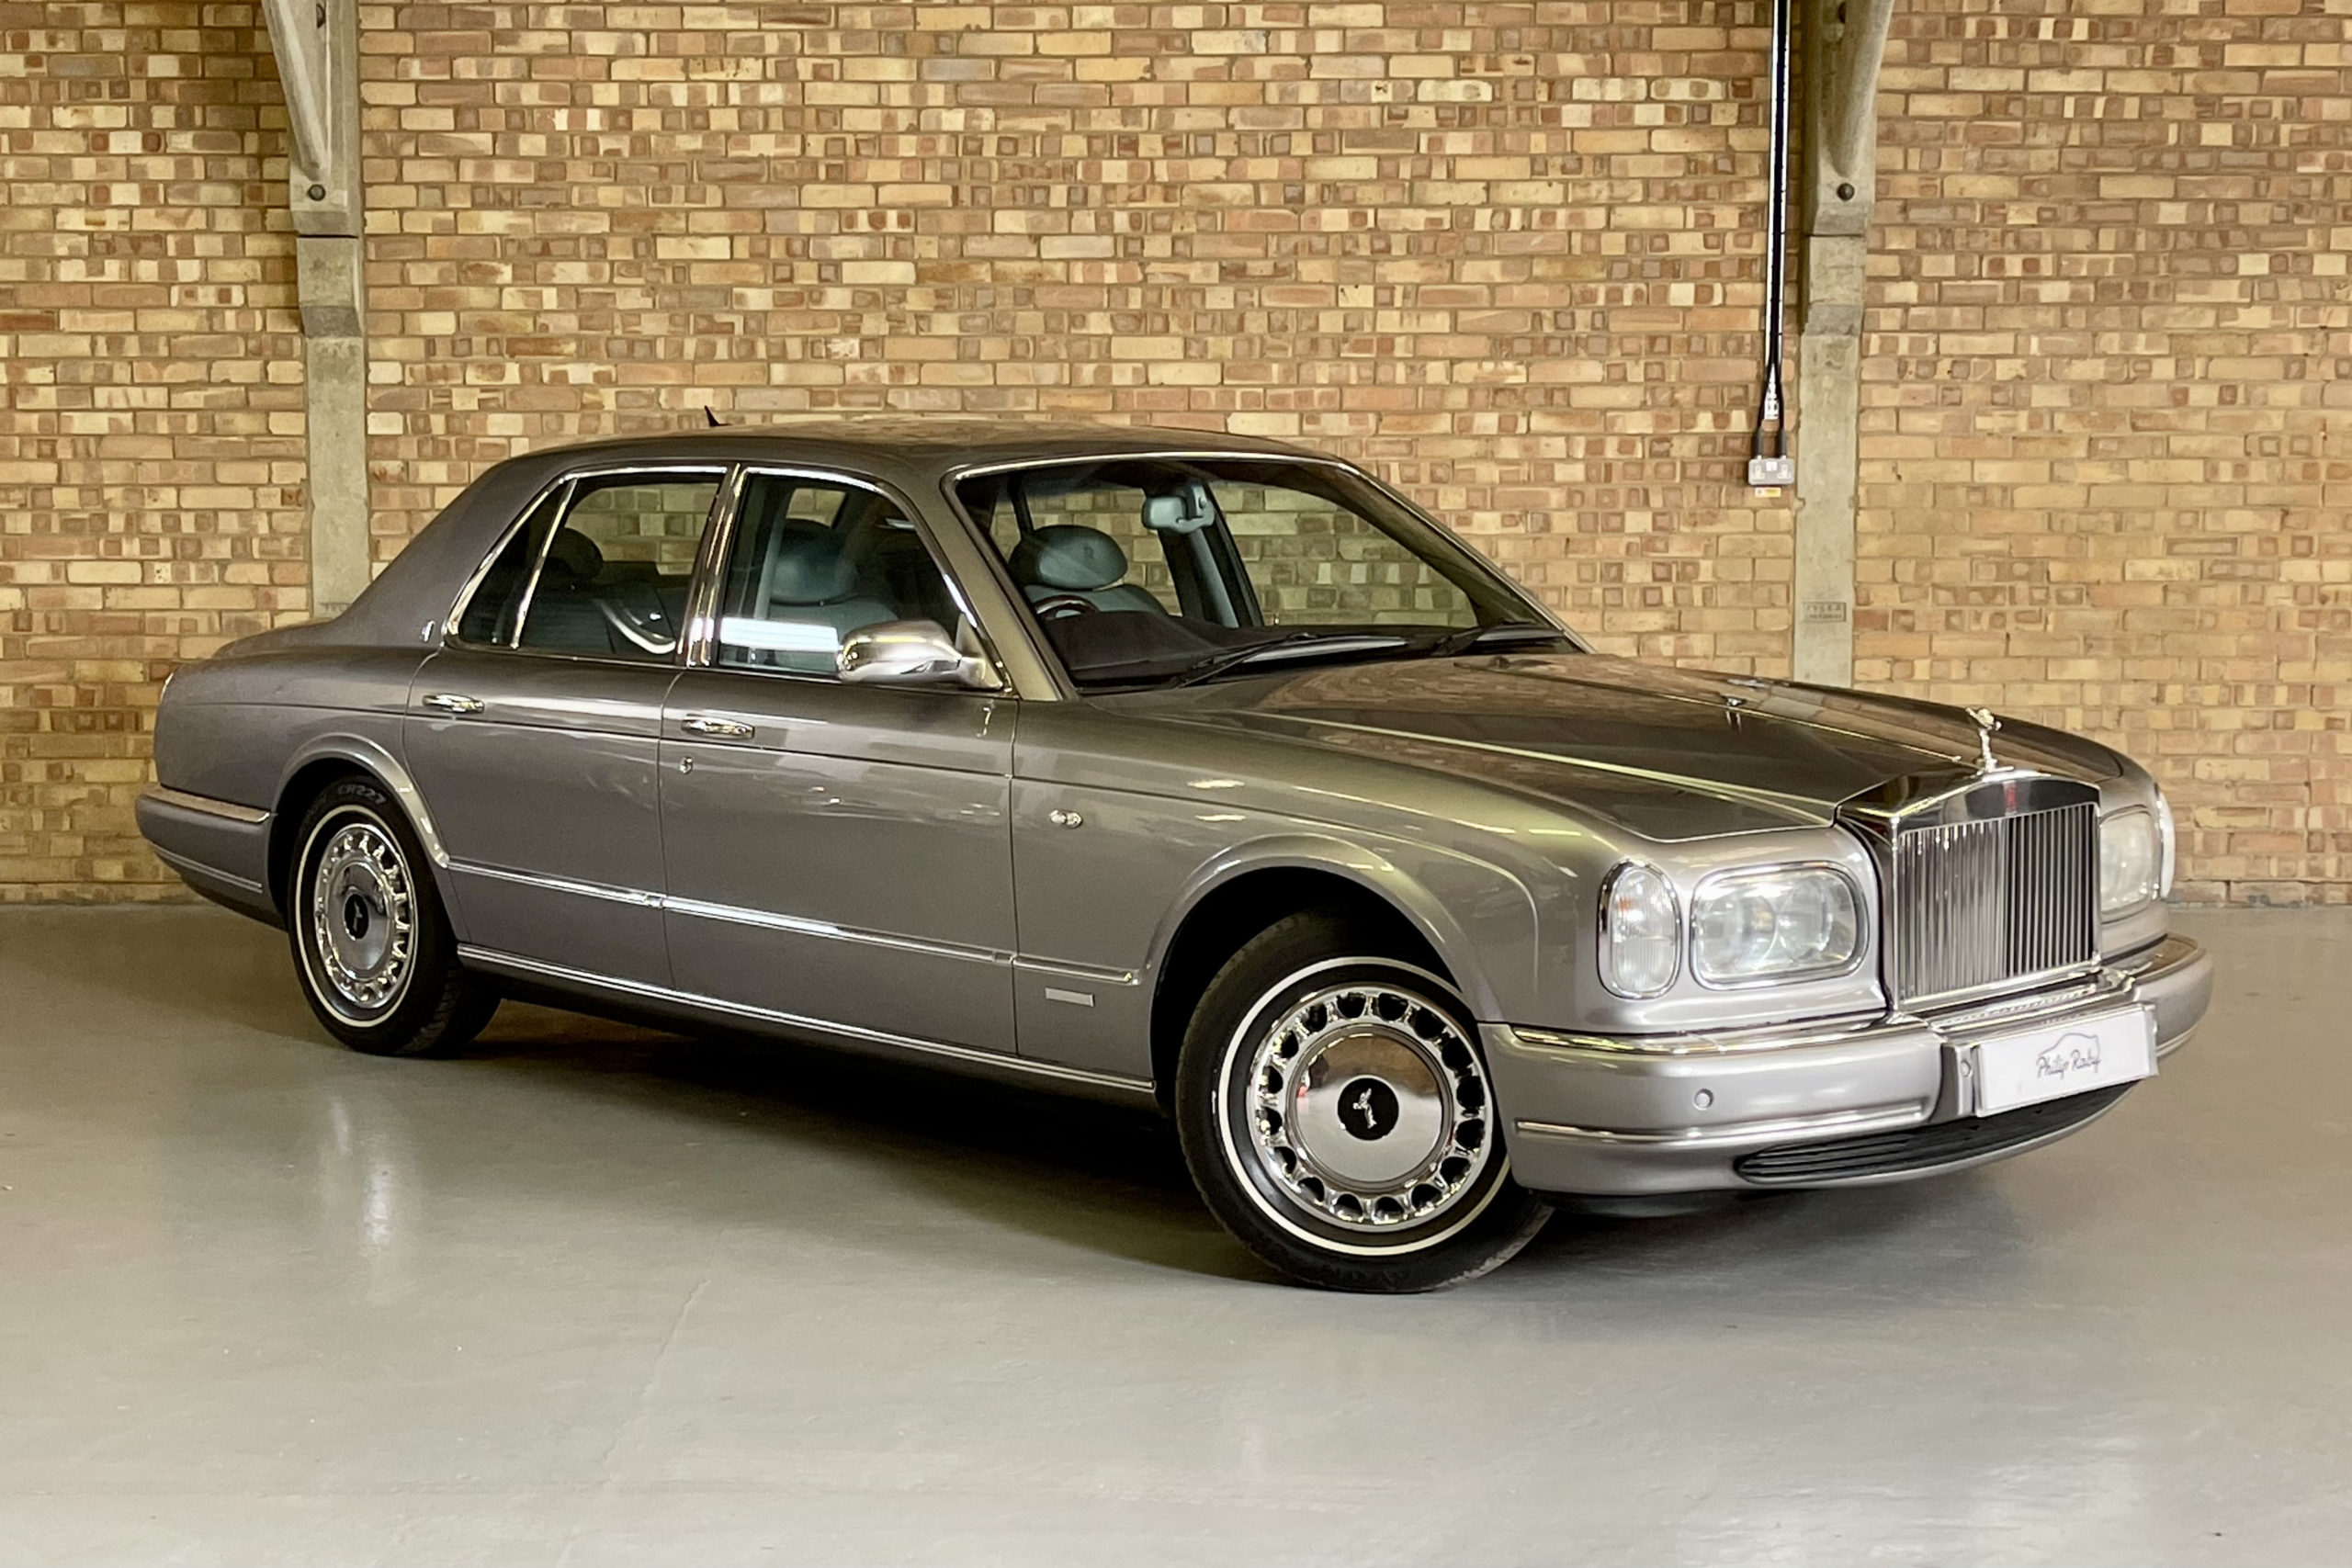 Billionaire project car Oneoff RollsRoyce Silver Spirit Convertible up  for auction  Drive